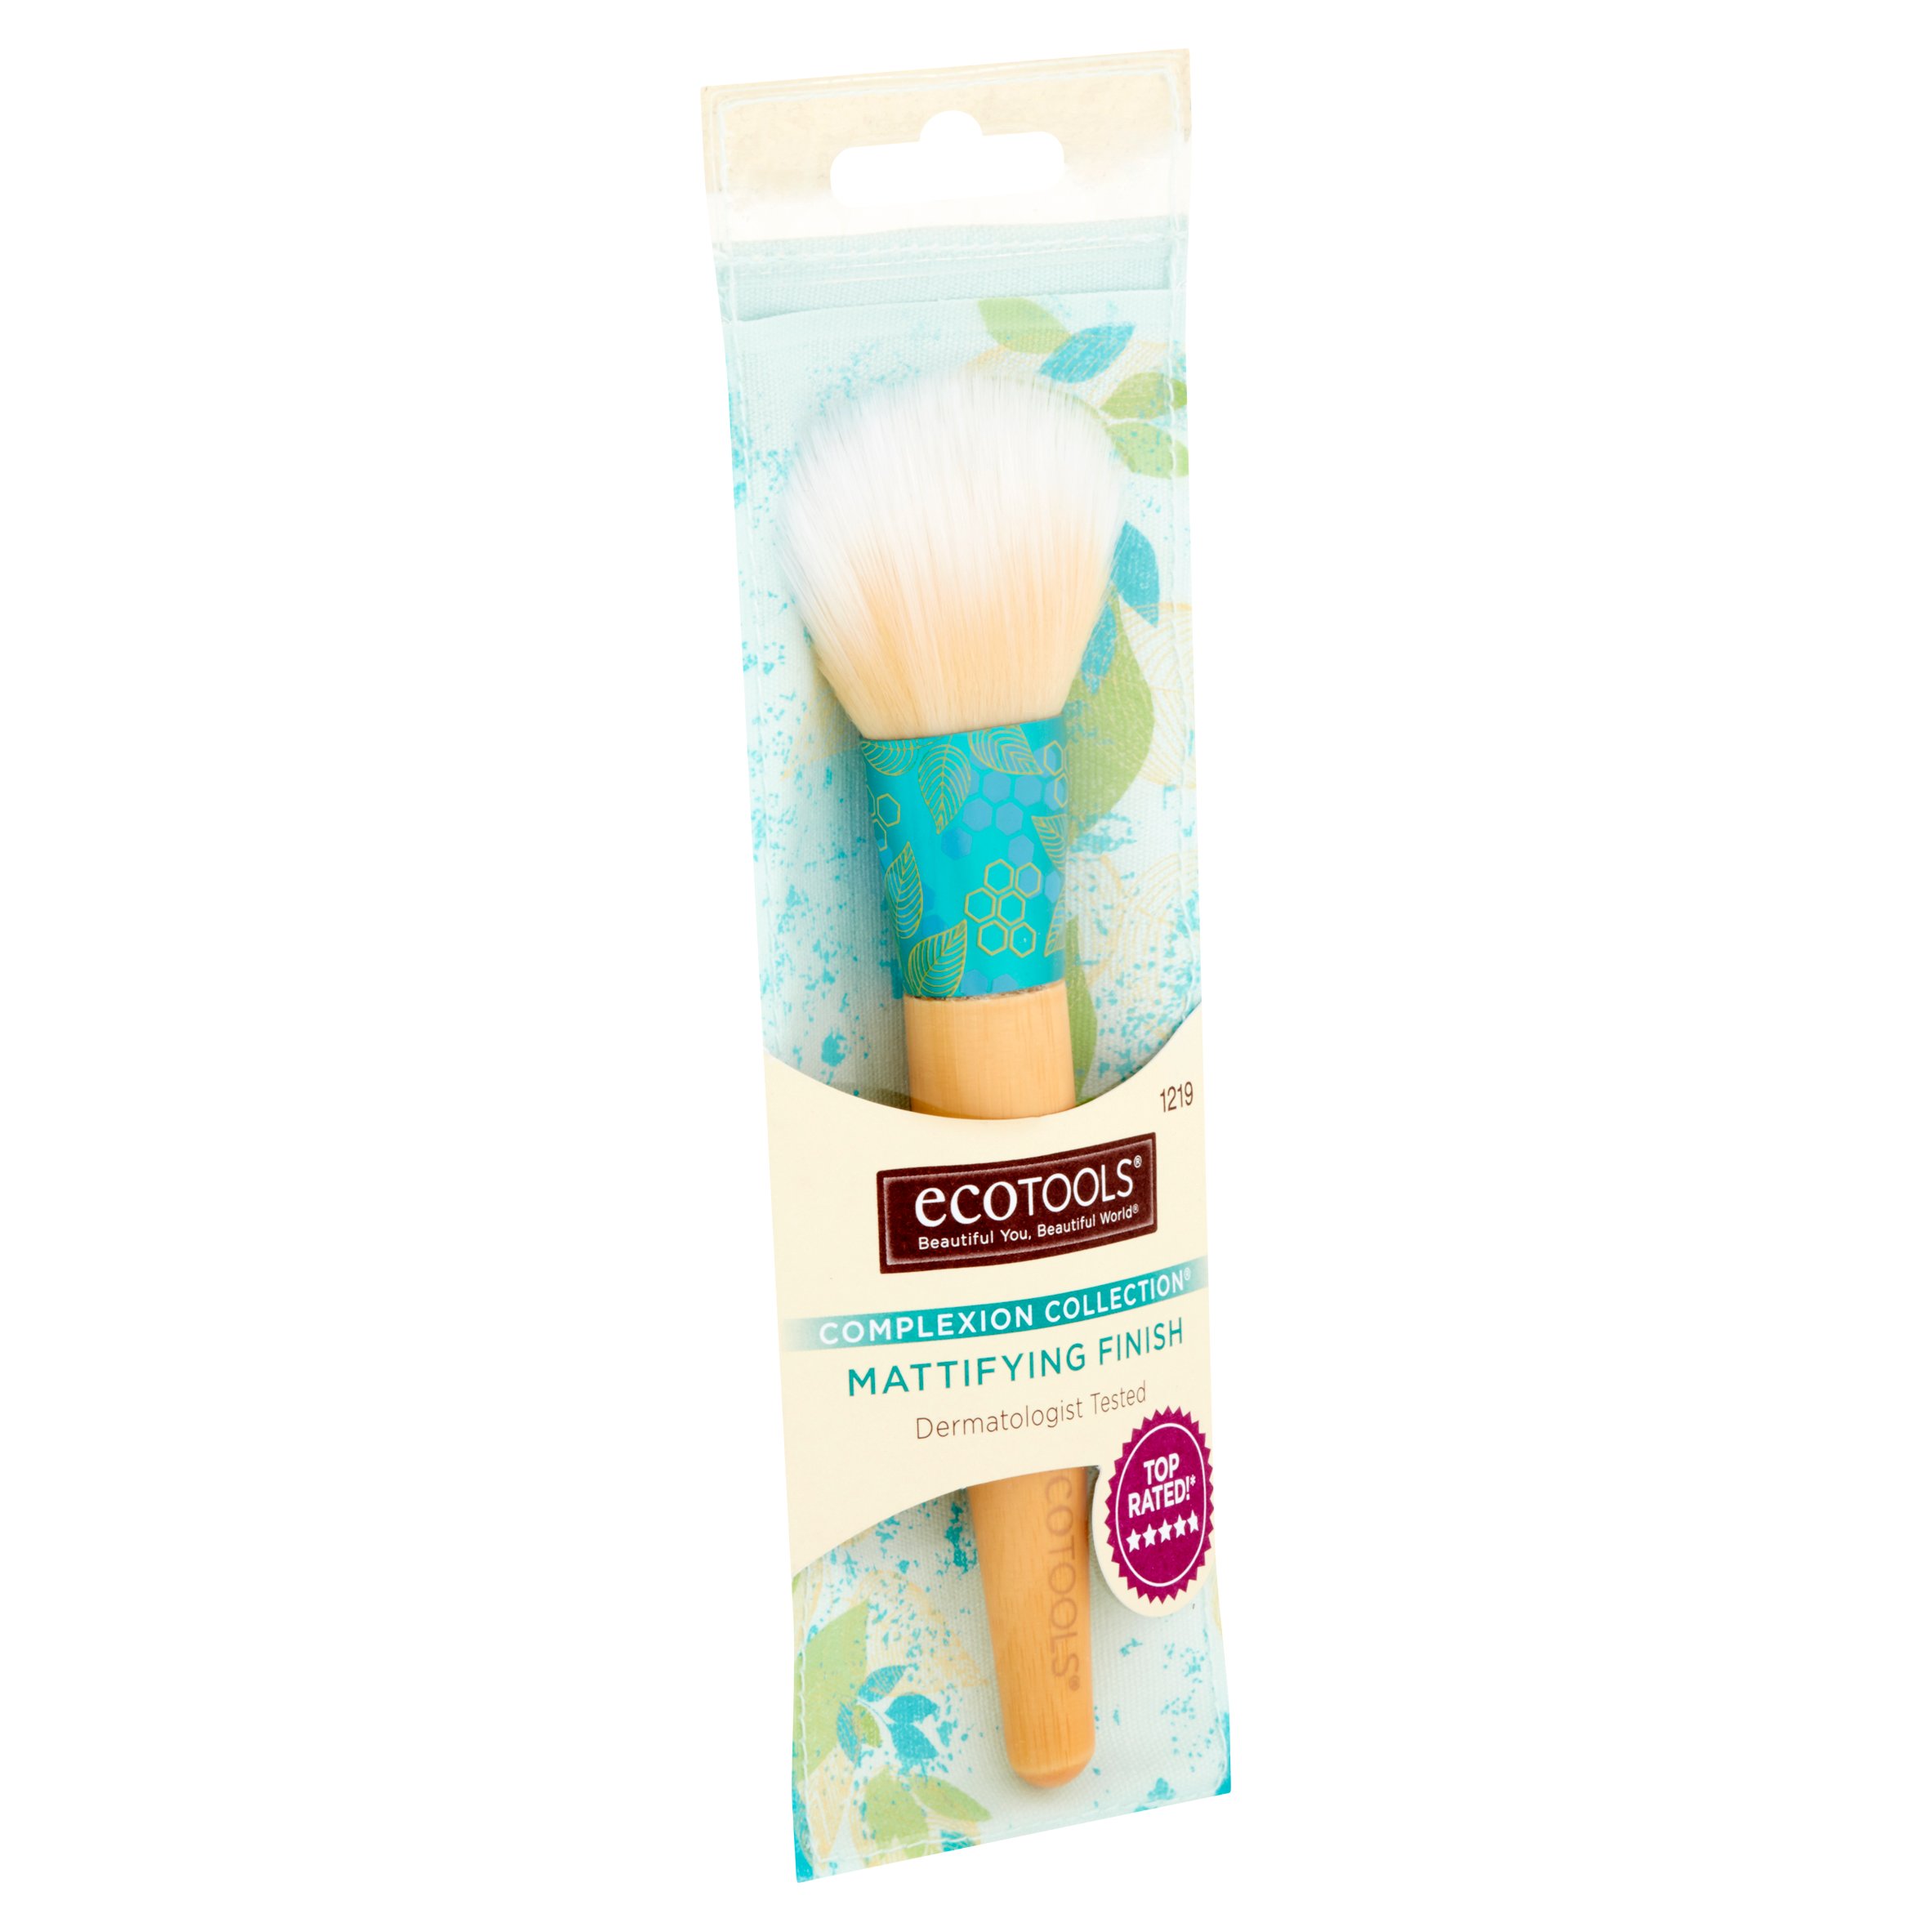 EcoTools Complexion Collection Mattifying Finish Makeup Brush - image 2 of 4